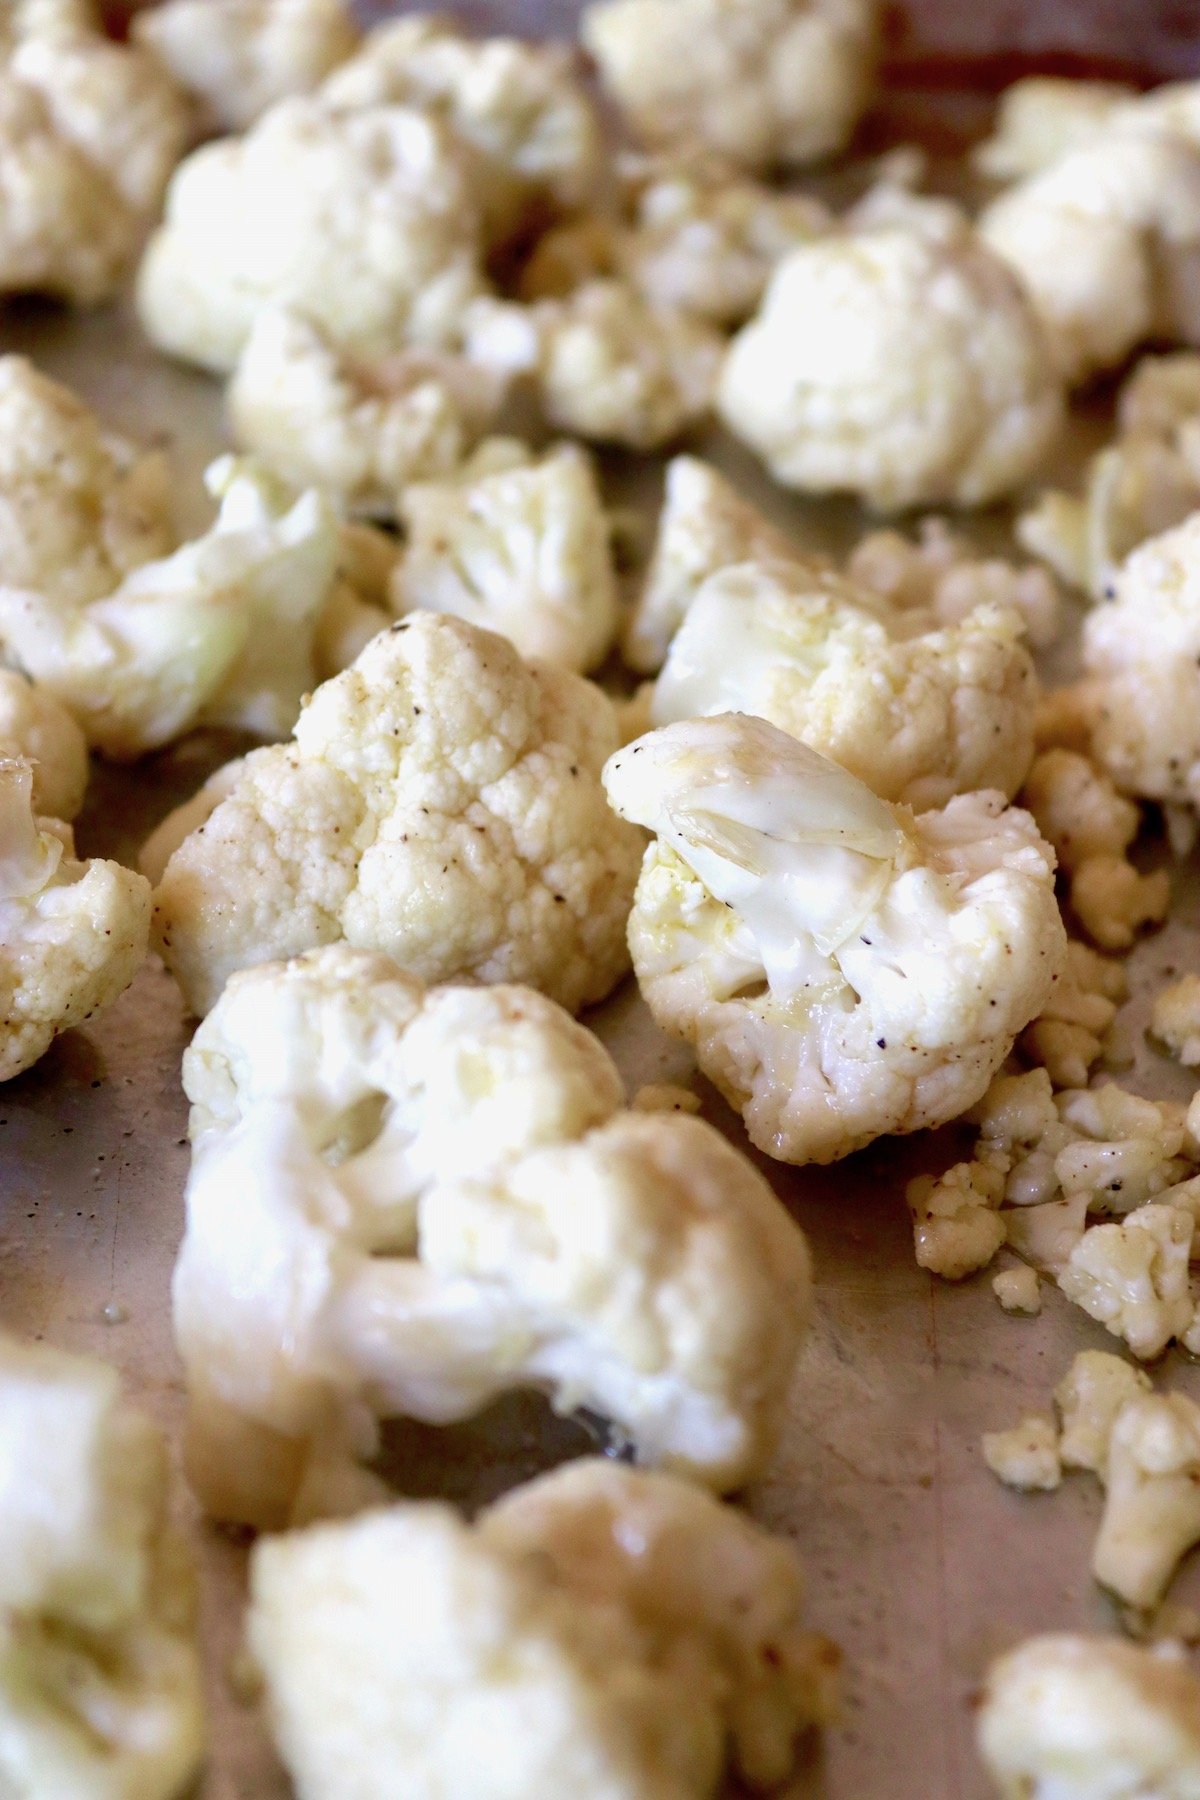 Raw pieces of cauliflower on a sheet pan.